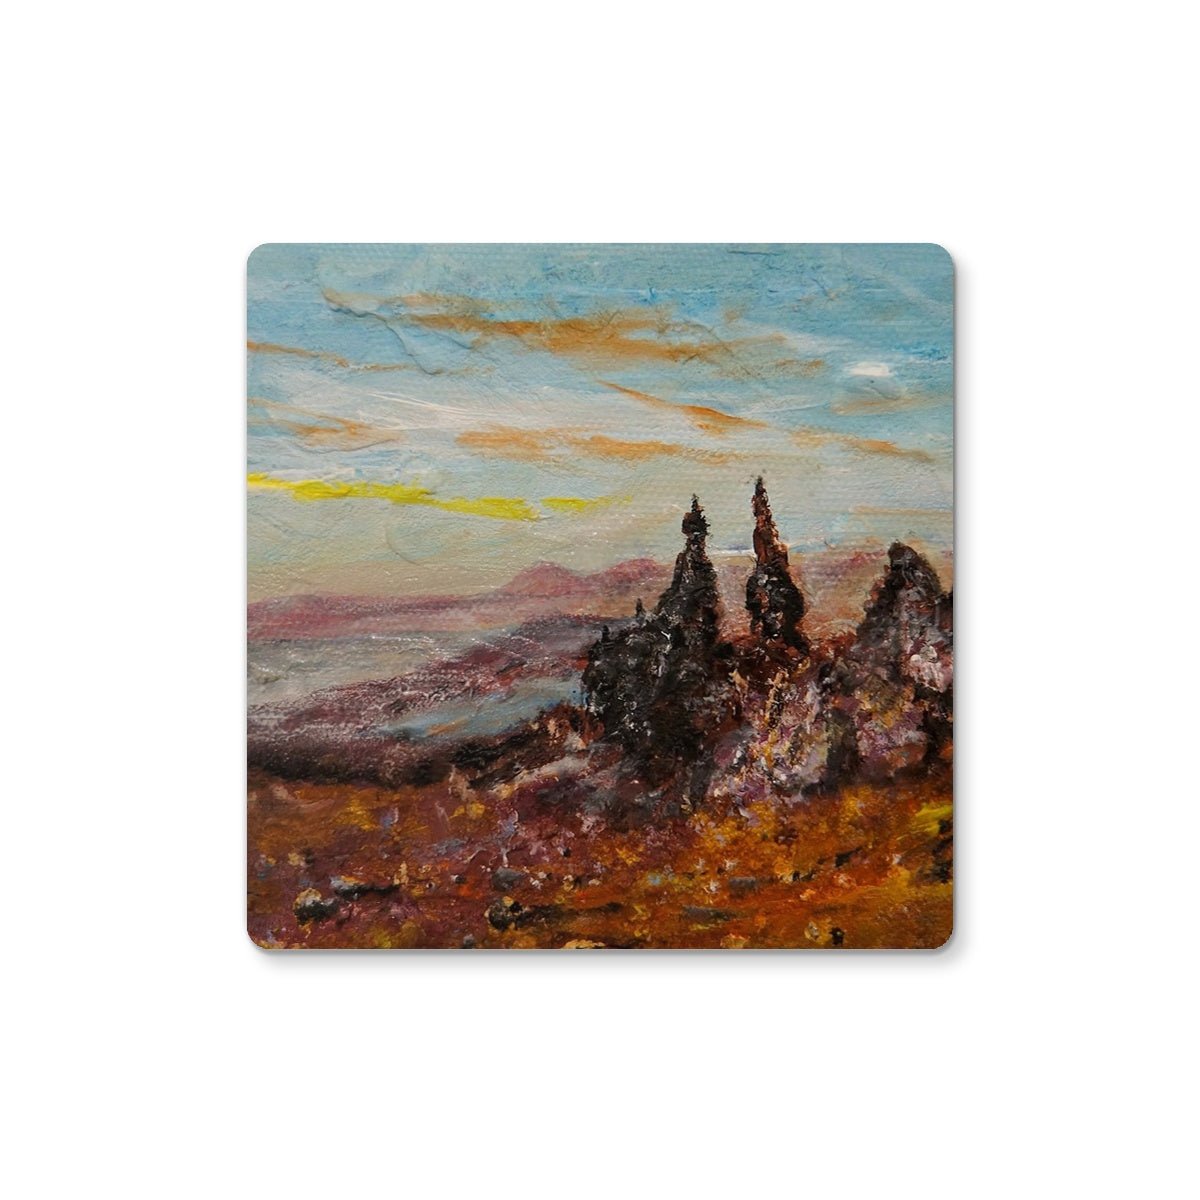 The Old Man Of Storr Skye Art Gifts Coaster-Coasters-Skye Art Gallery-Single Coaster-Paintings, Prints, Homeware, Art Gifts From Scotland By Scottish Artist Kevin Hunter